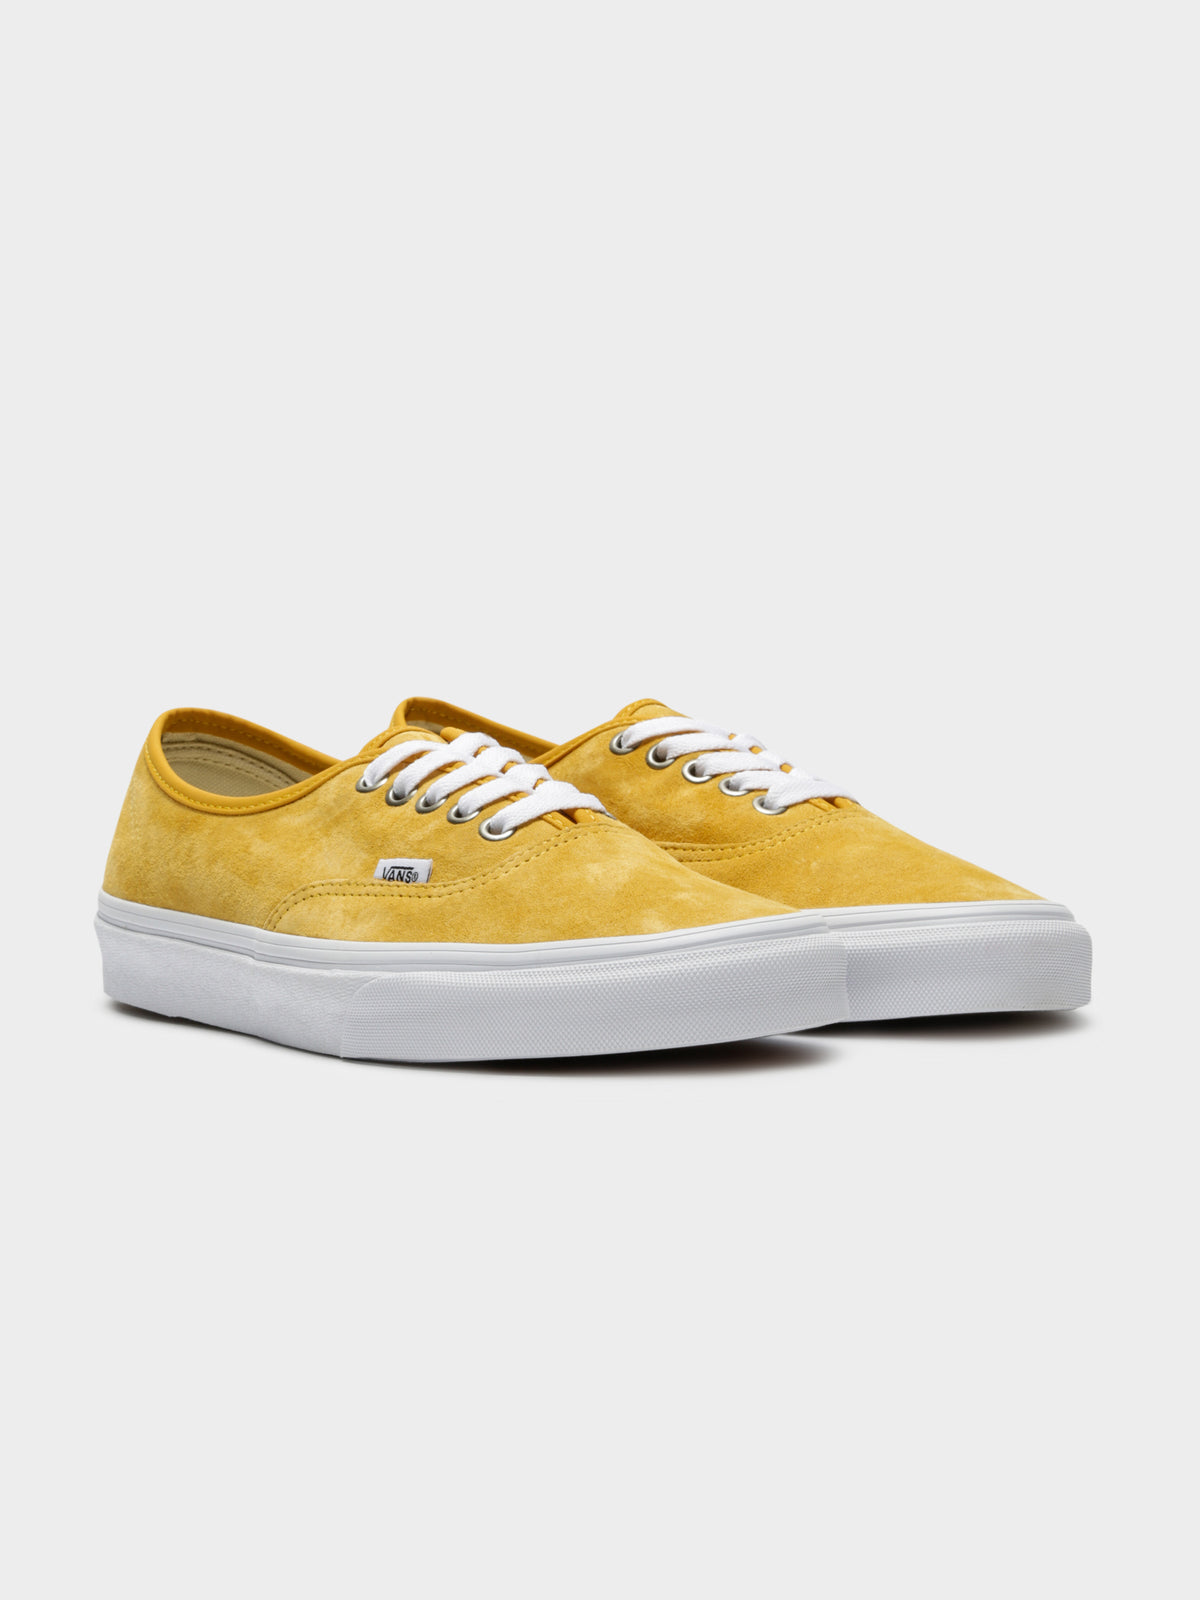 Unisex Authentic Pig Suede Sneakers in Yellow &amp; White